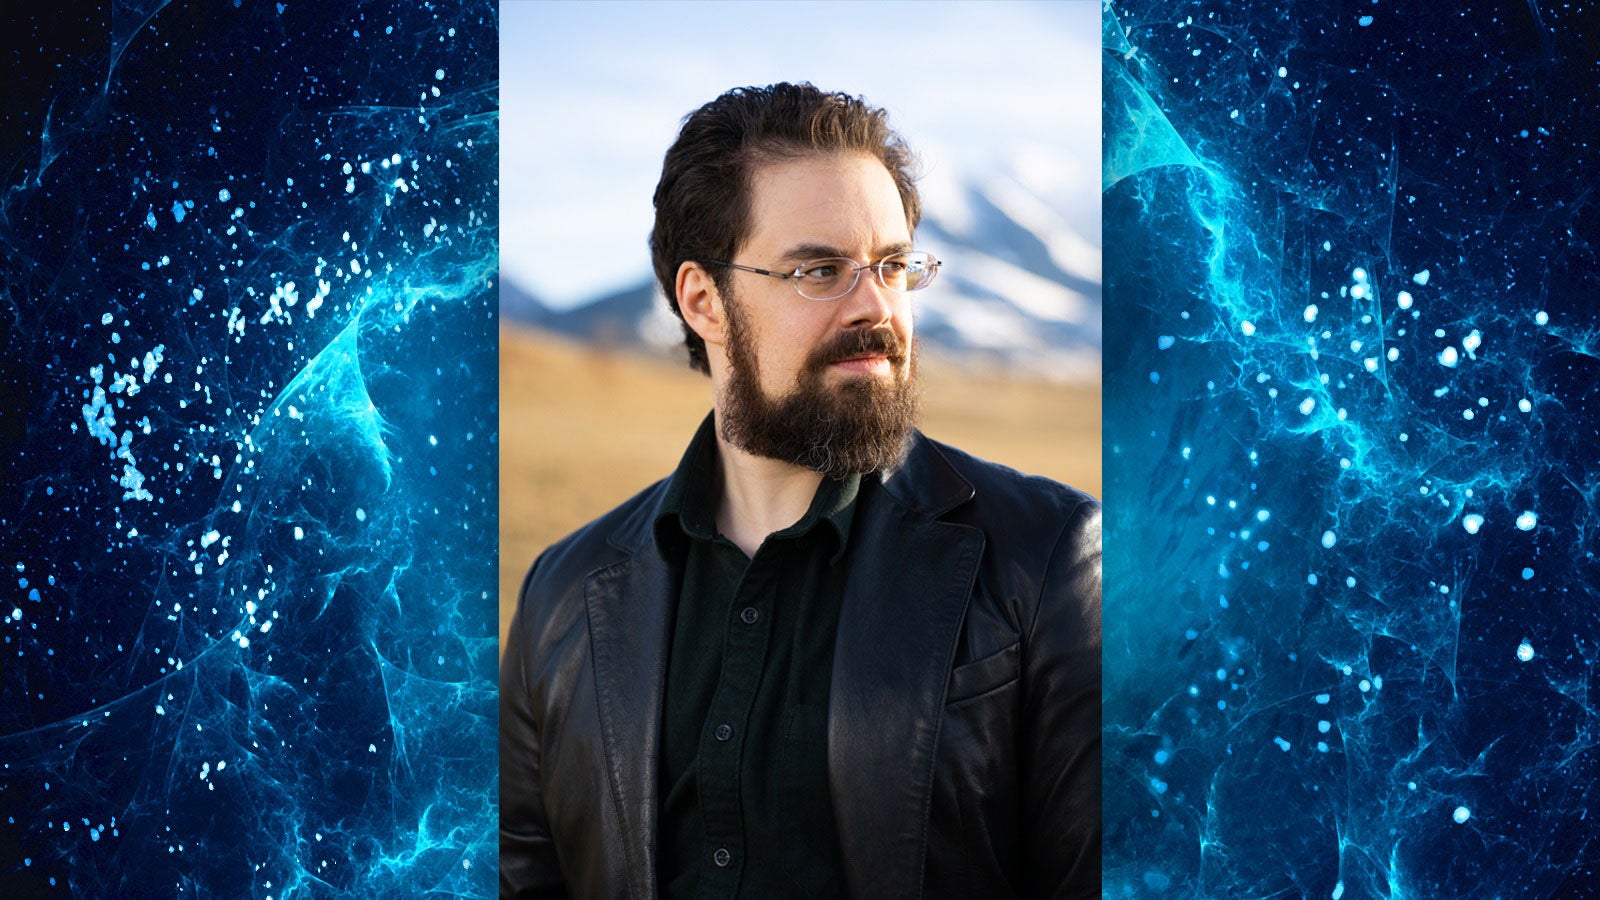 Photo of Christopher Paolini against a blue space background